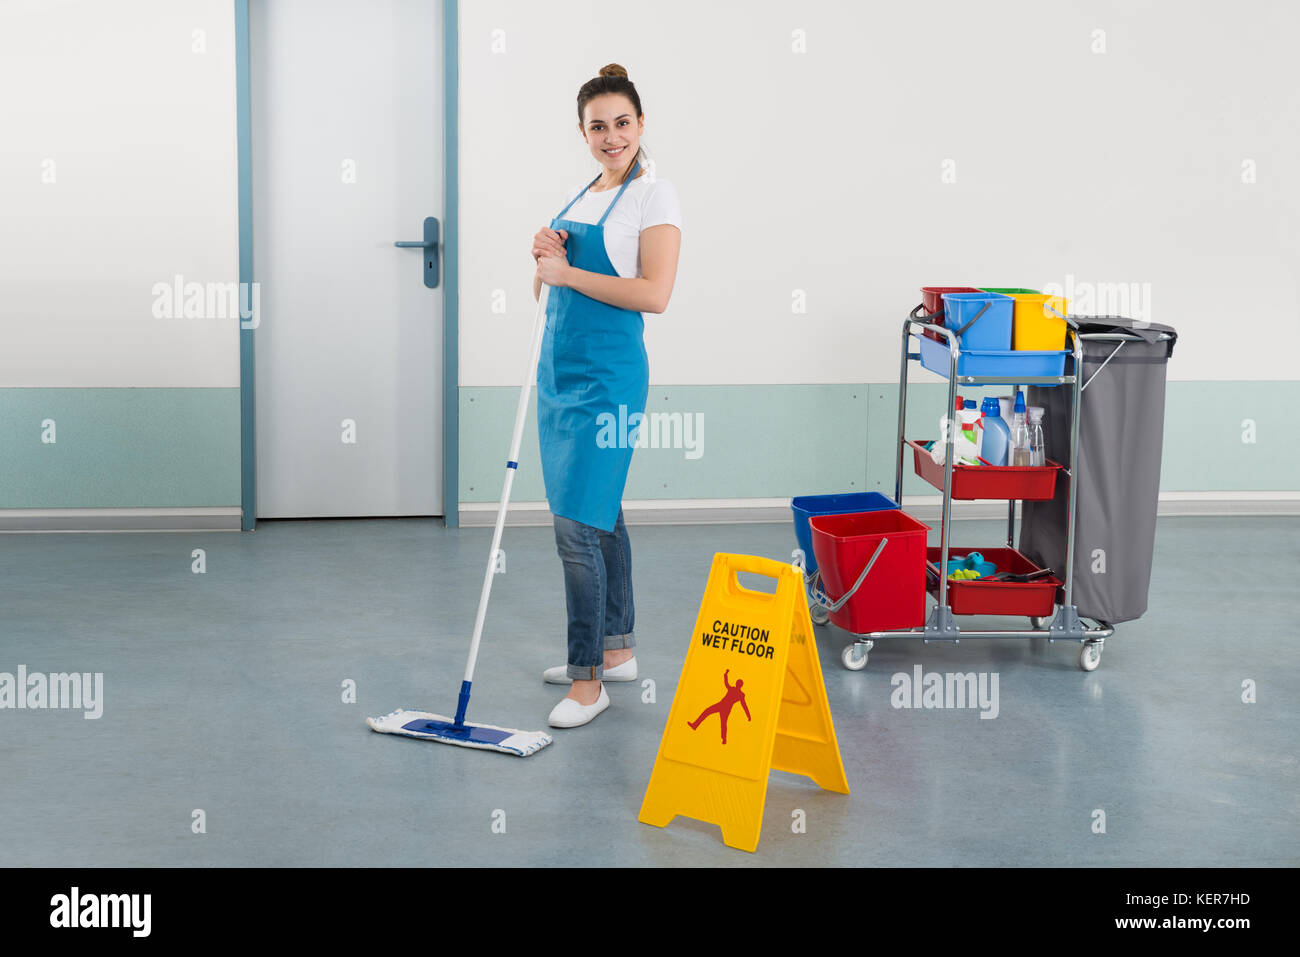 Female Janitor Mopping Corridor With Caution Sign Stock Photo